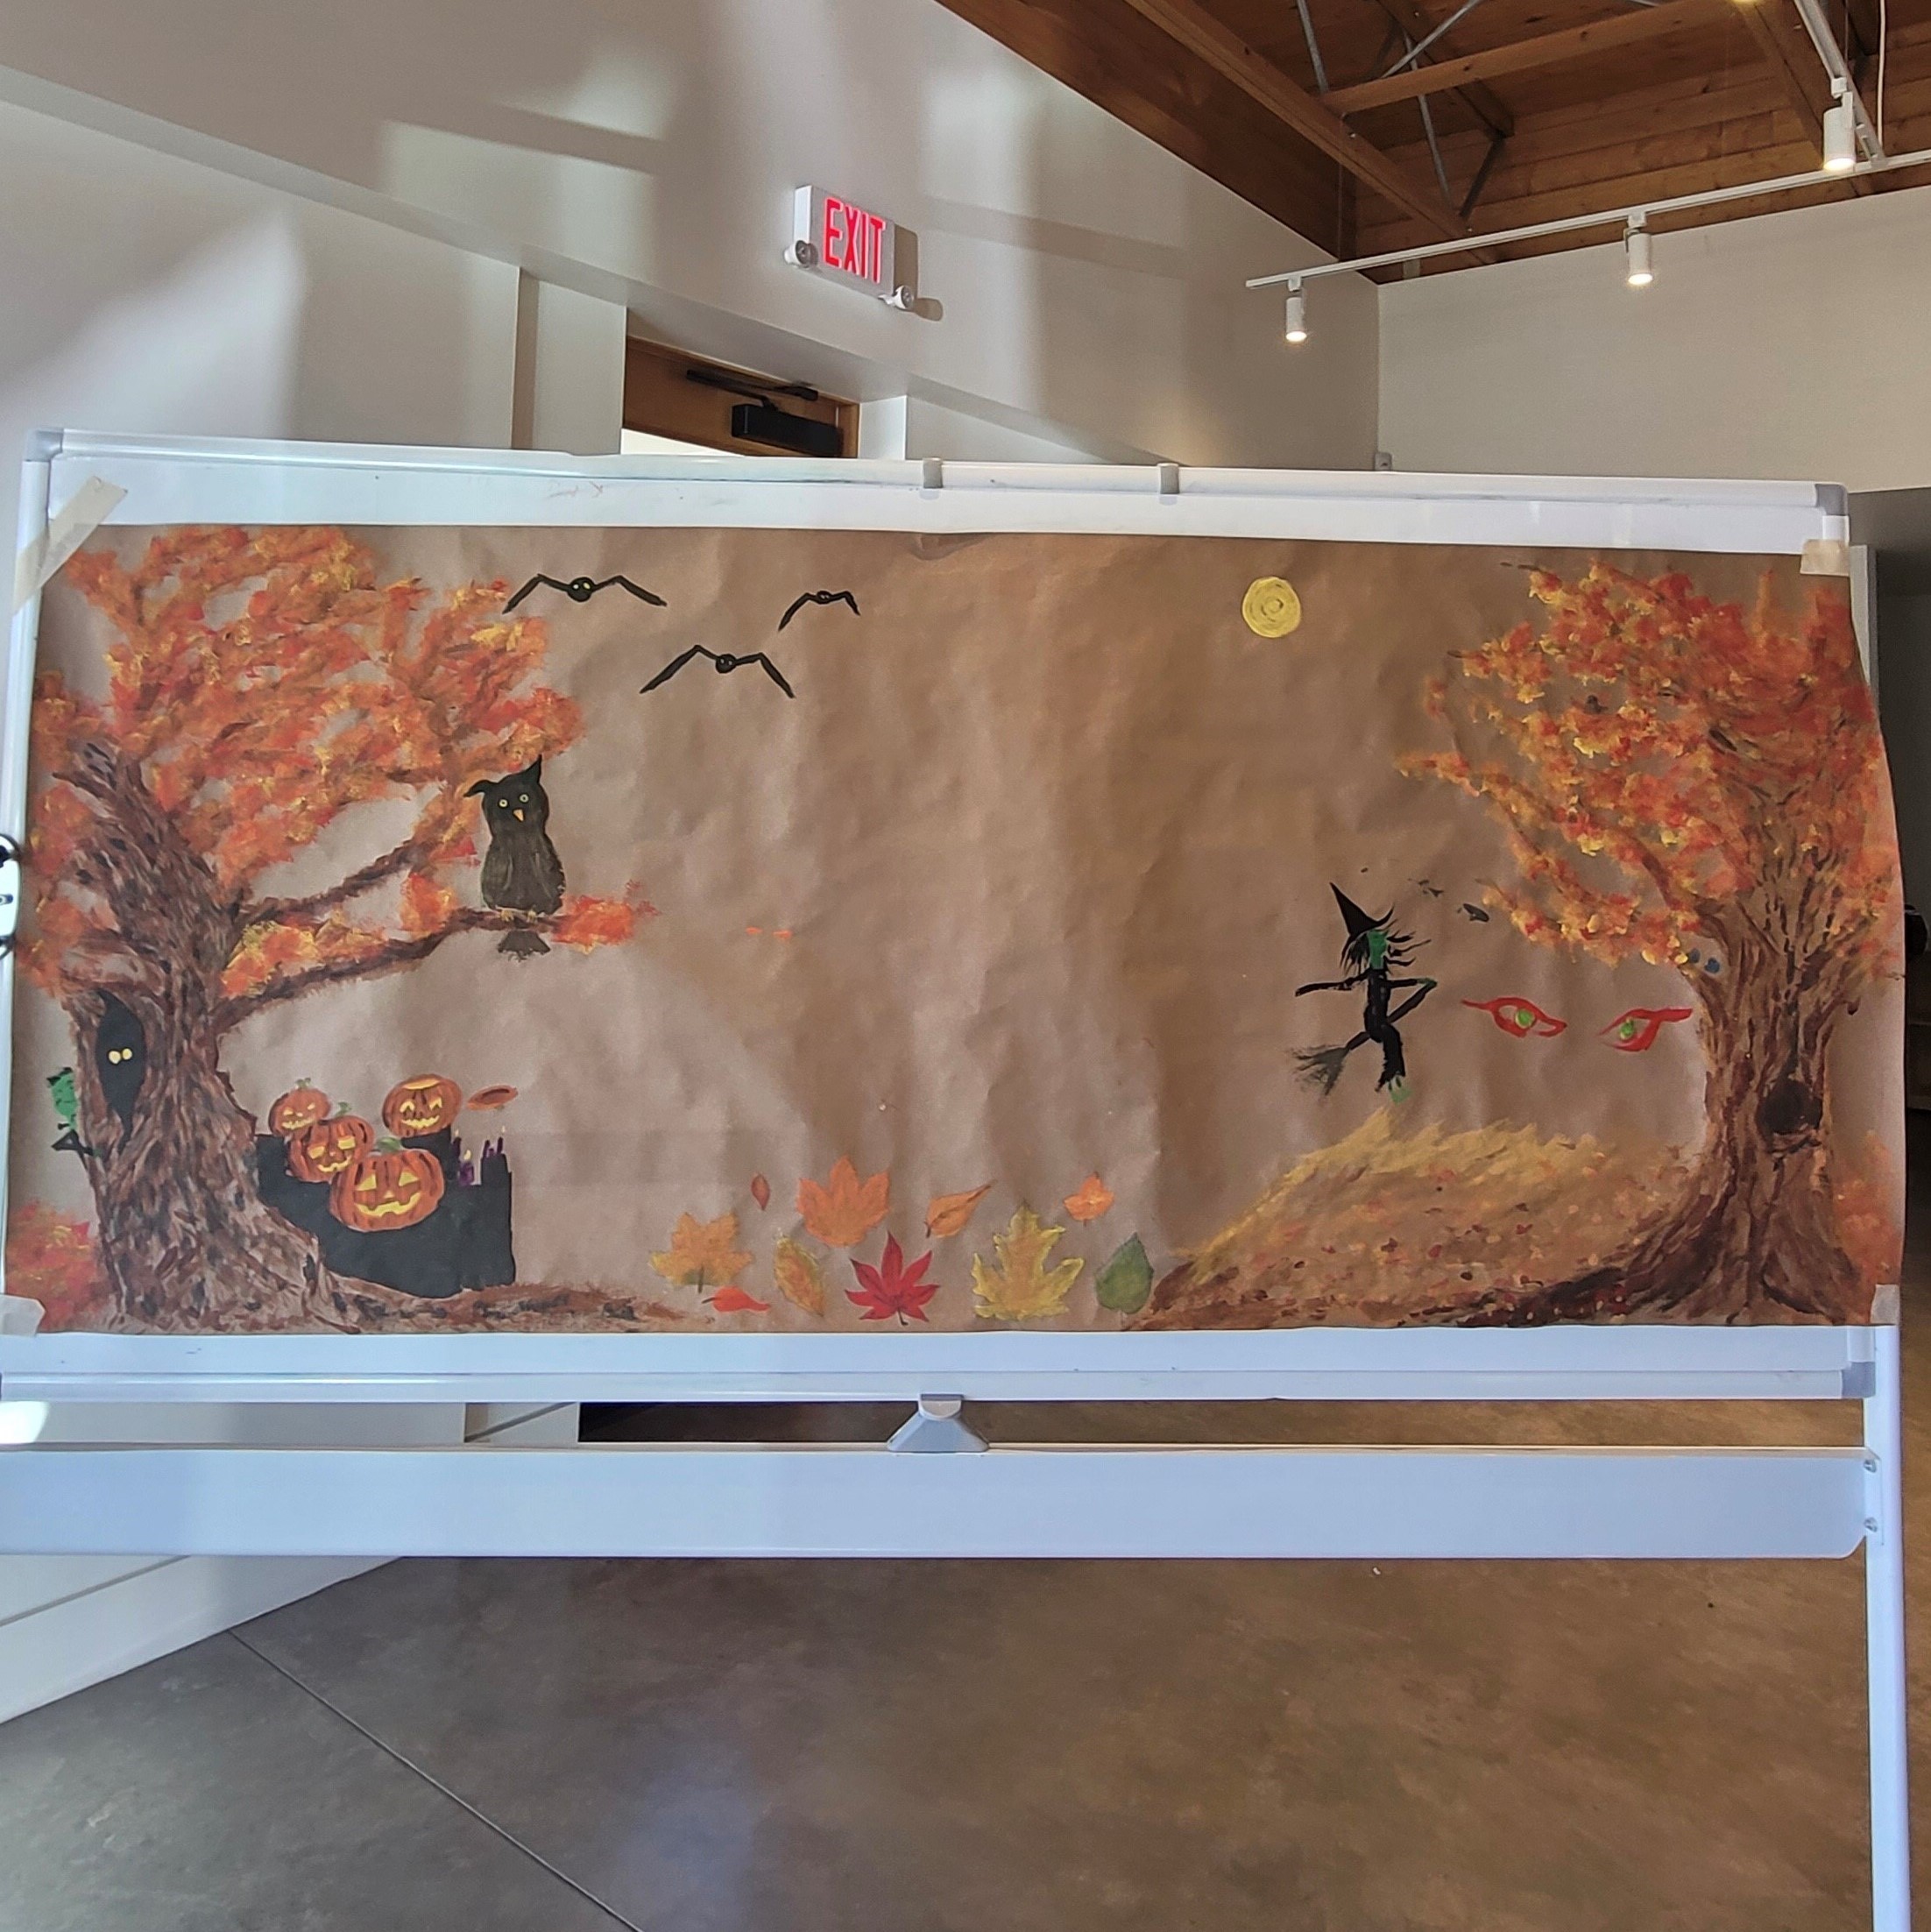 Halloween mural created by participants in our Family Day event